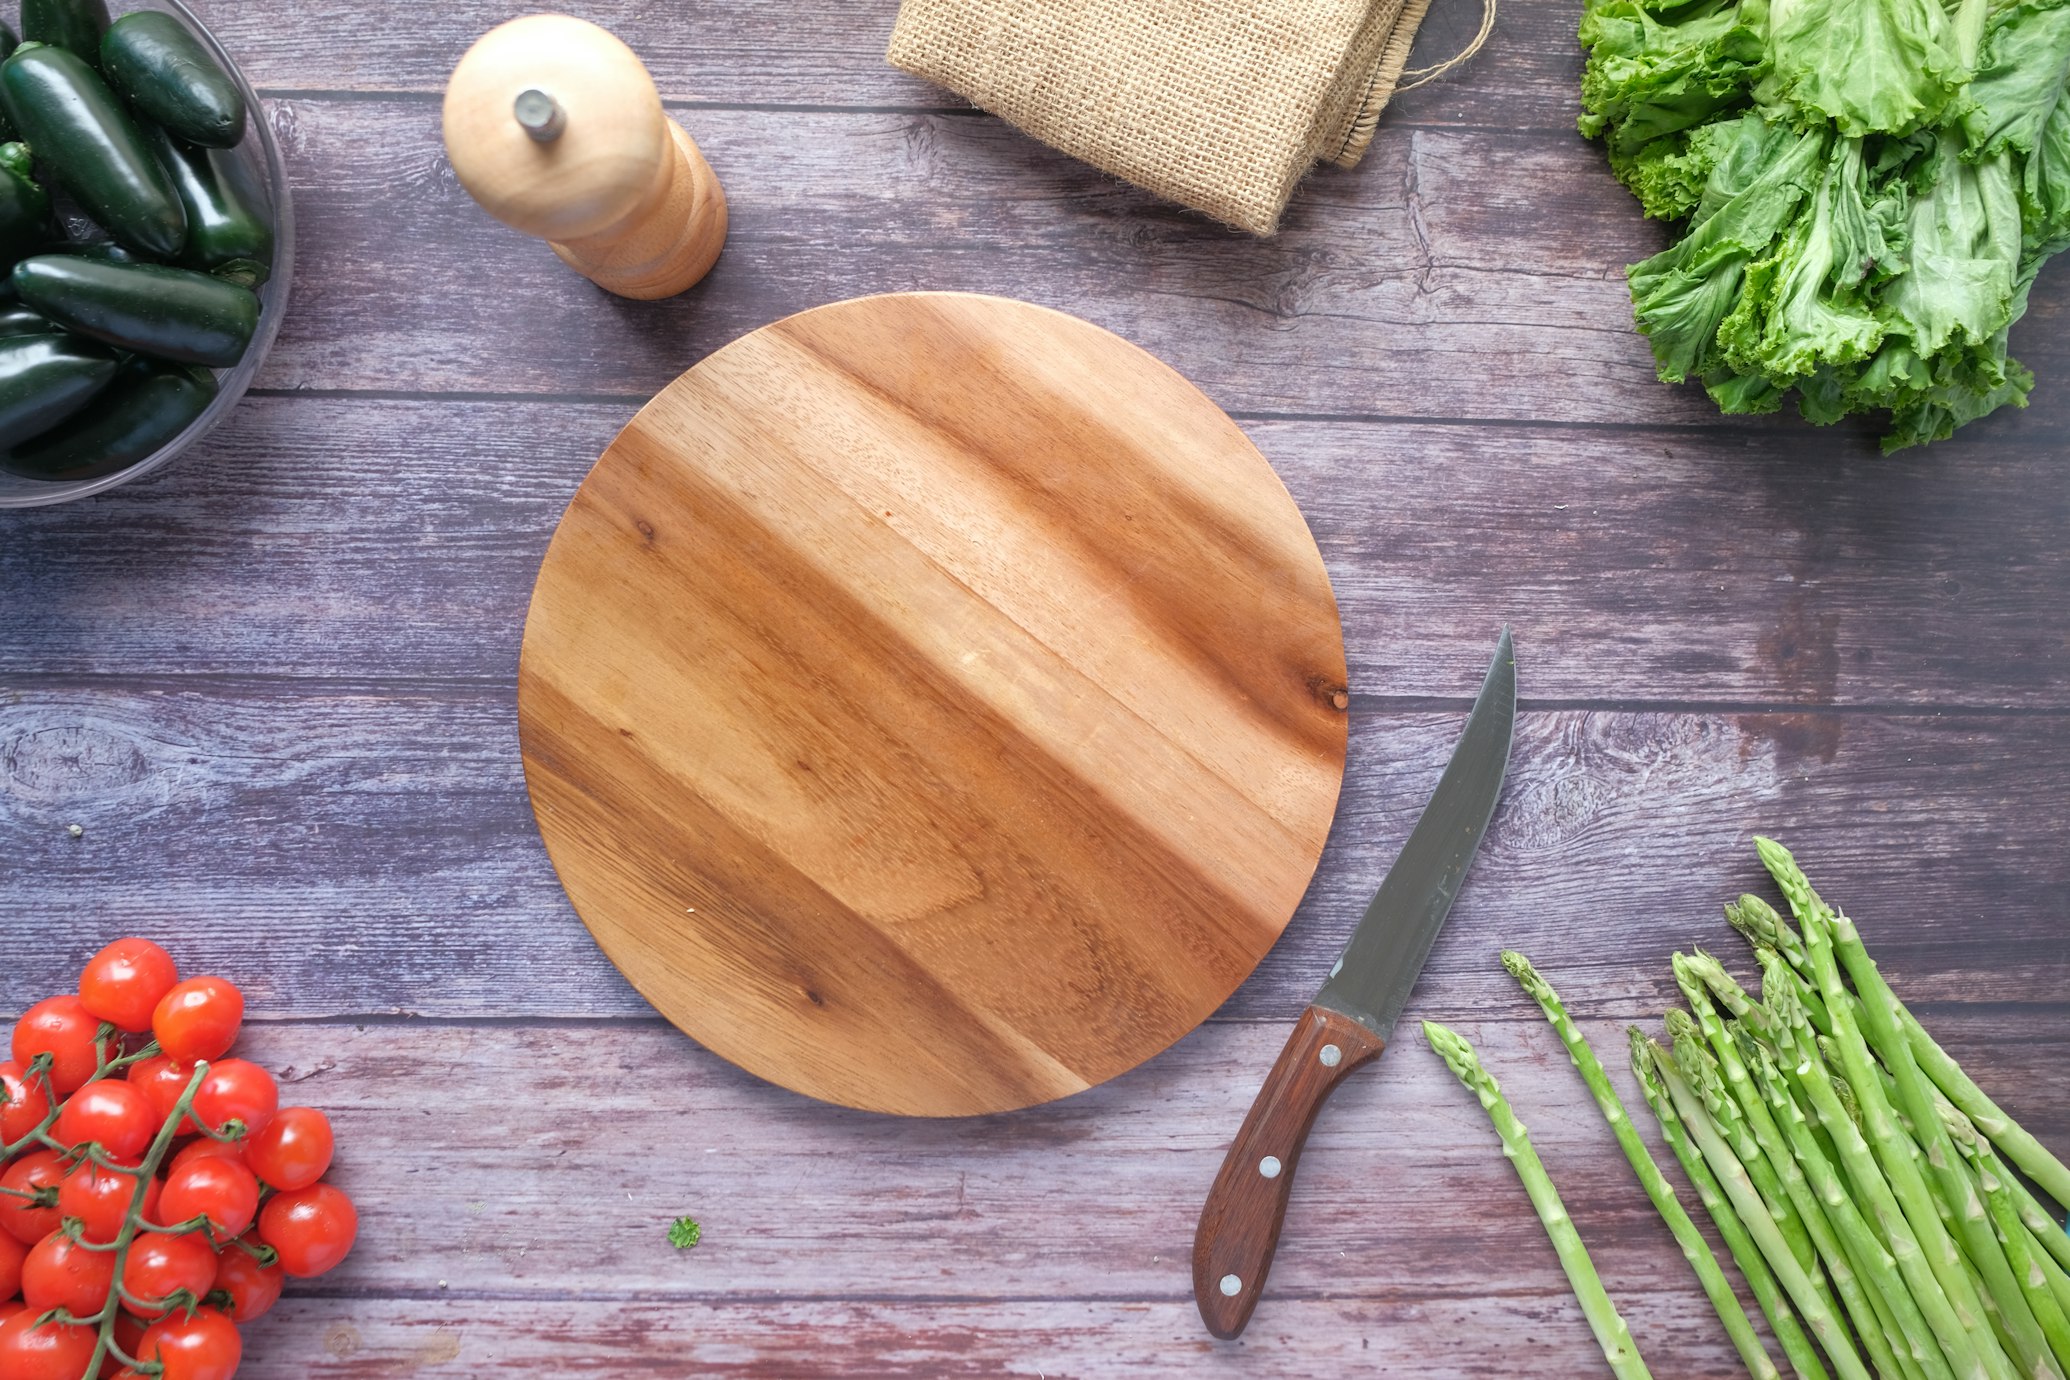 How To Display Cutting Boards On Kitchen Counter